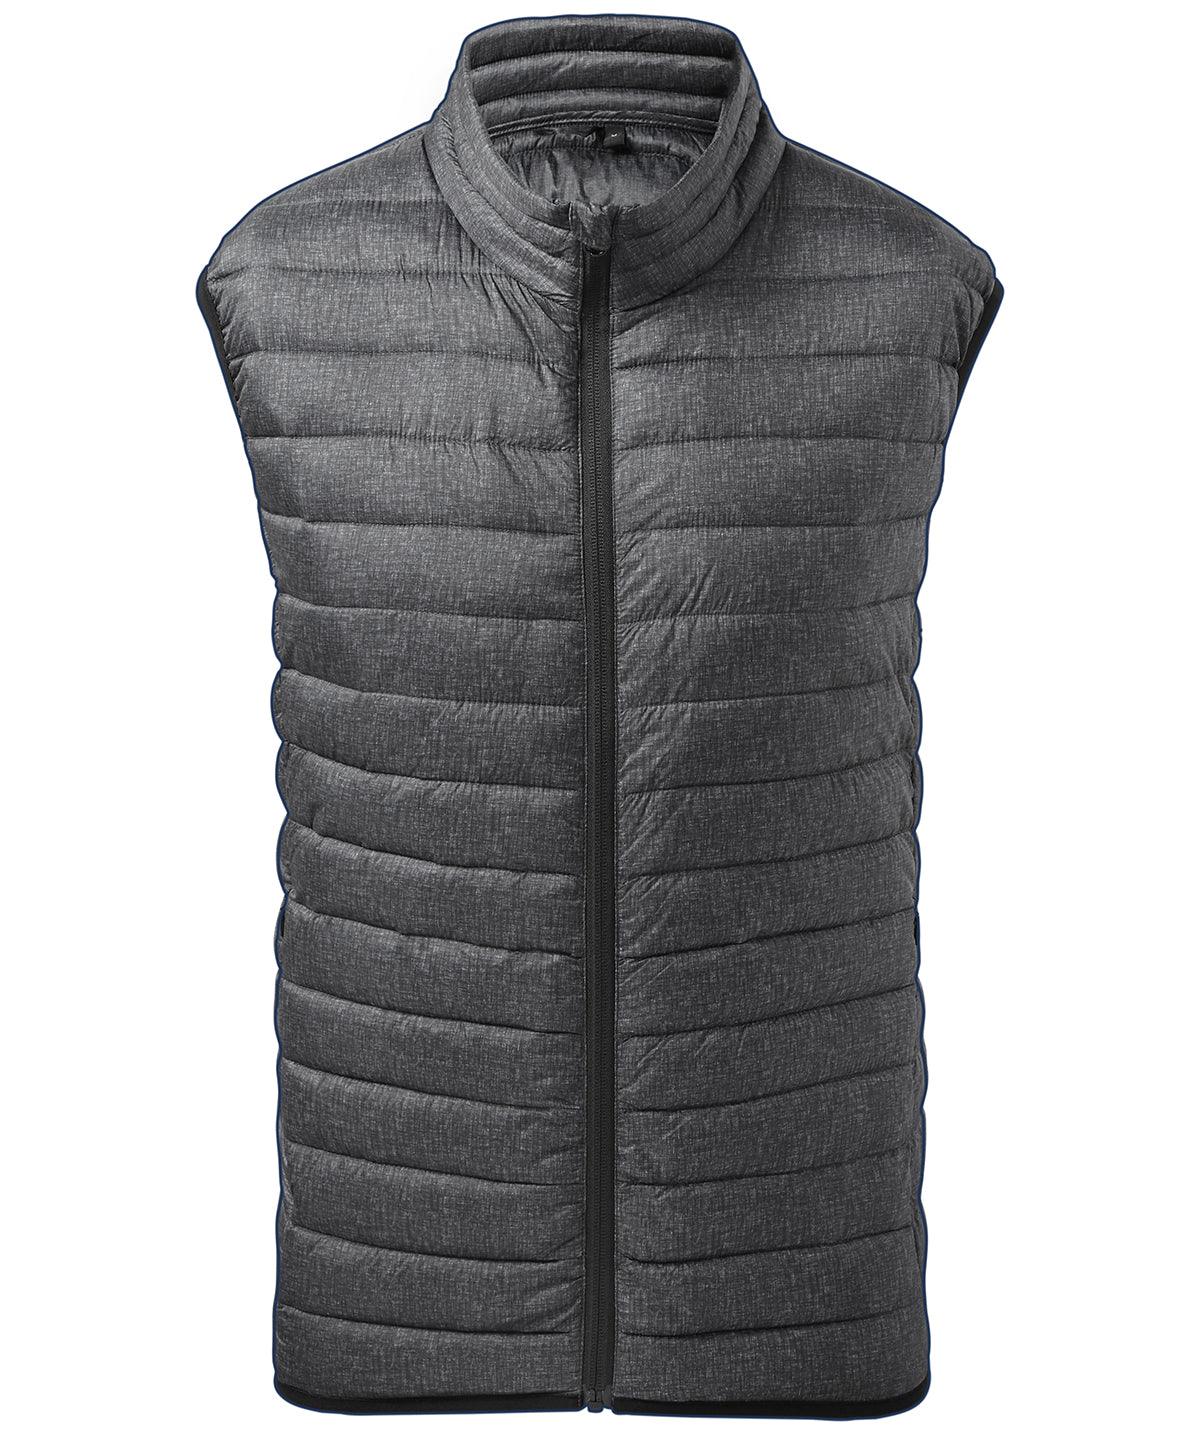 Charcoal Melange - Melange padded gilet Body Warmers 2786 Alfresco Dining, Directory, Gilets and Bodywarmers, Jackets & Coats, Outdoor Dining, Padded & Insulation, Plus Sizes, Rebrandable Schoolwear Centres